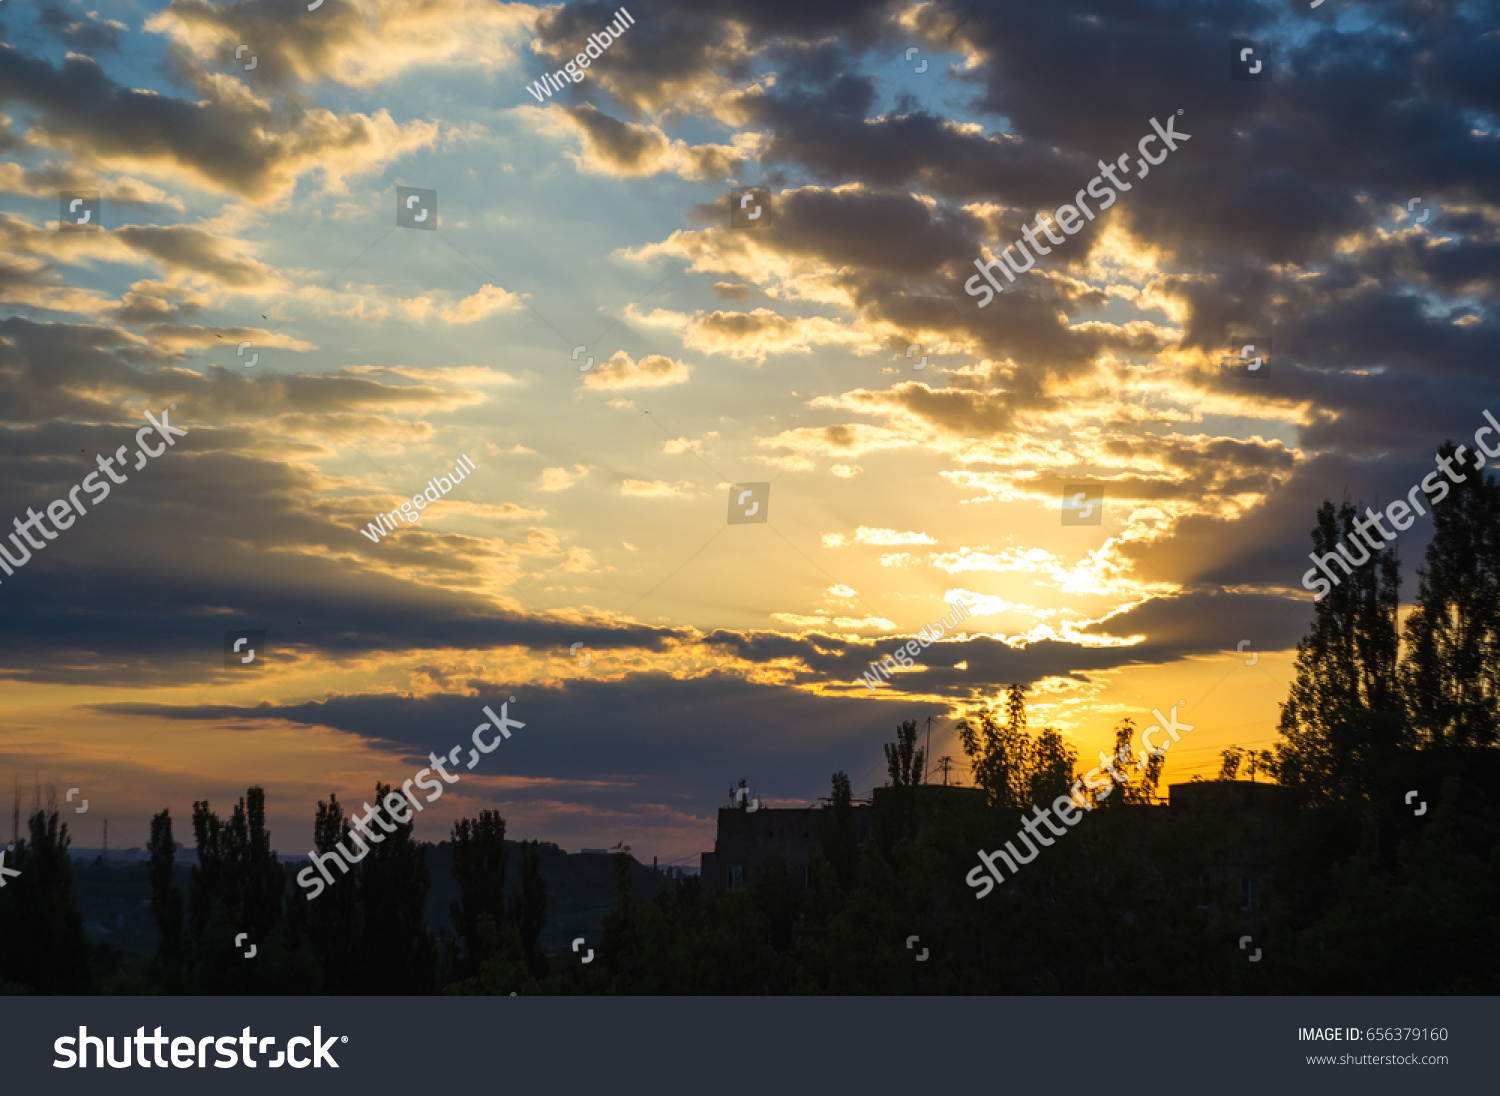 landscape with dramatic light - orange clouds and the outline of trees at sunrise #656379160